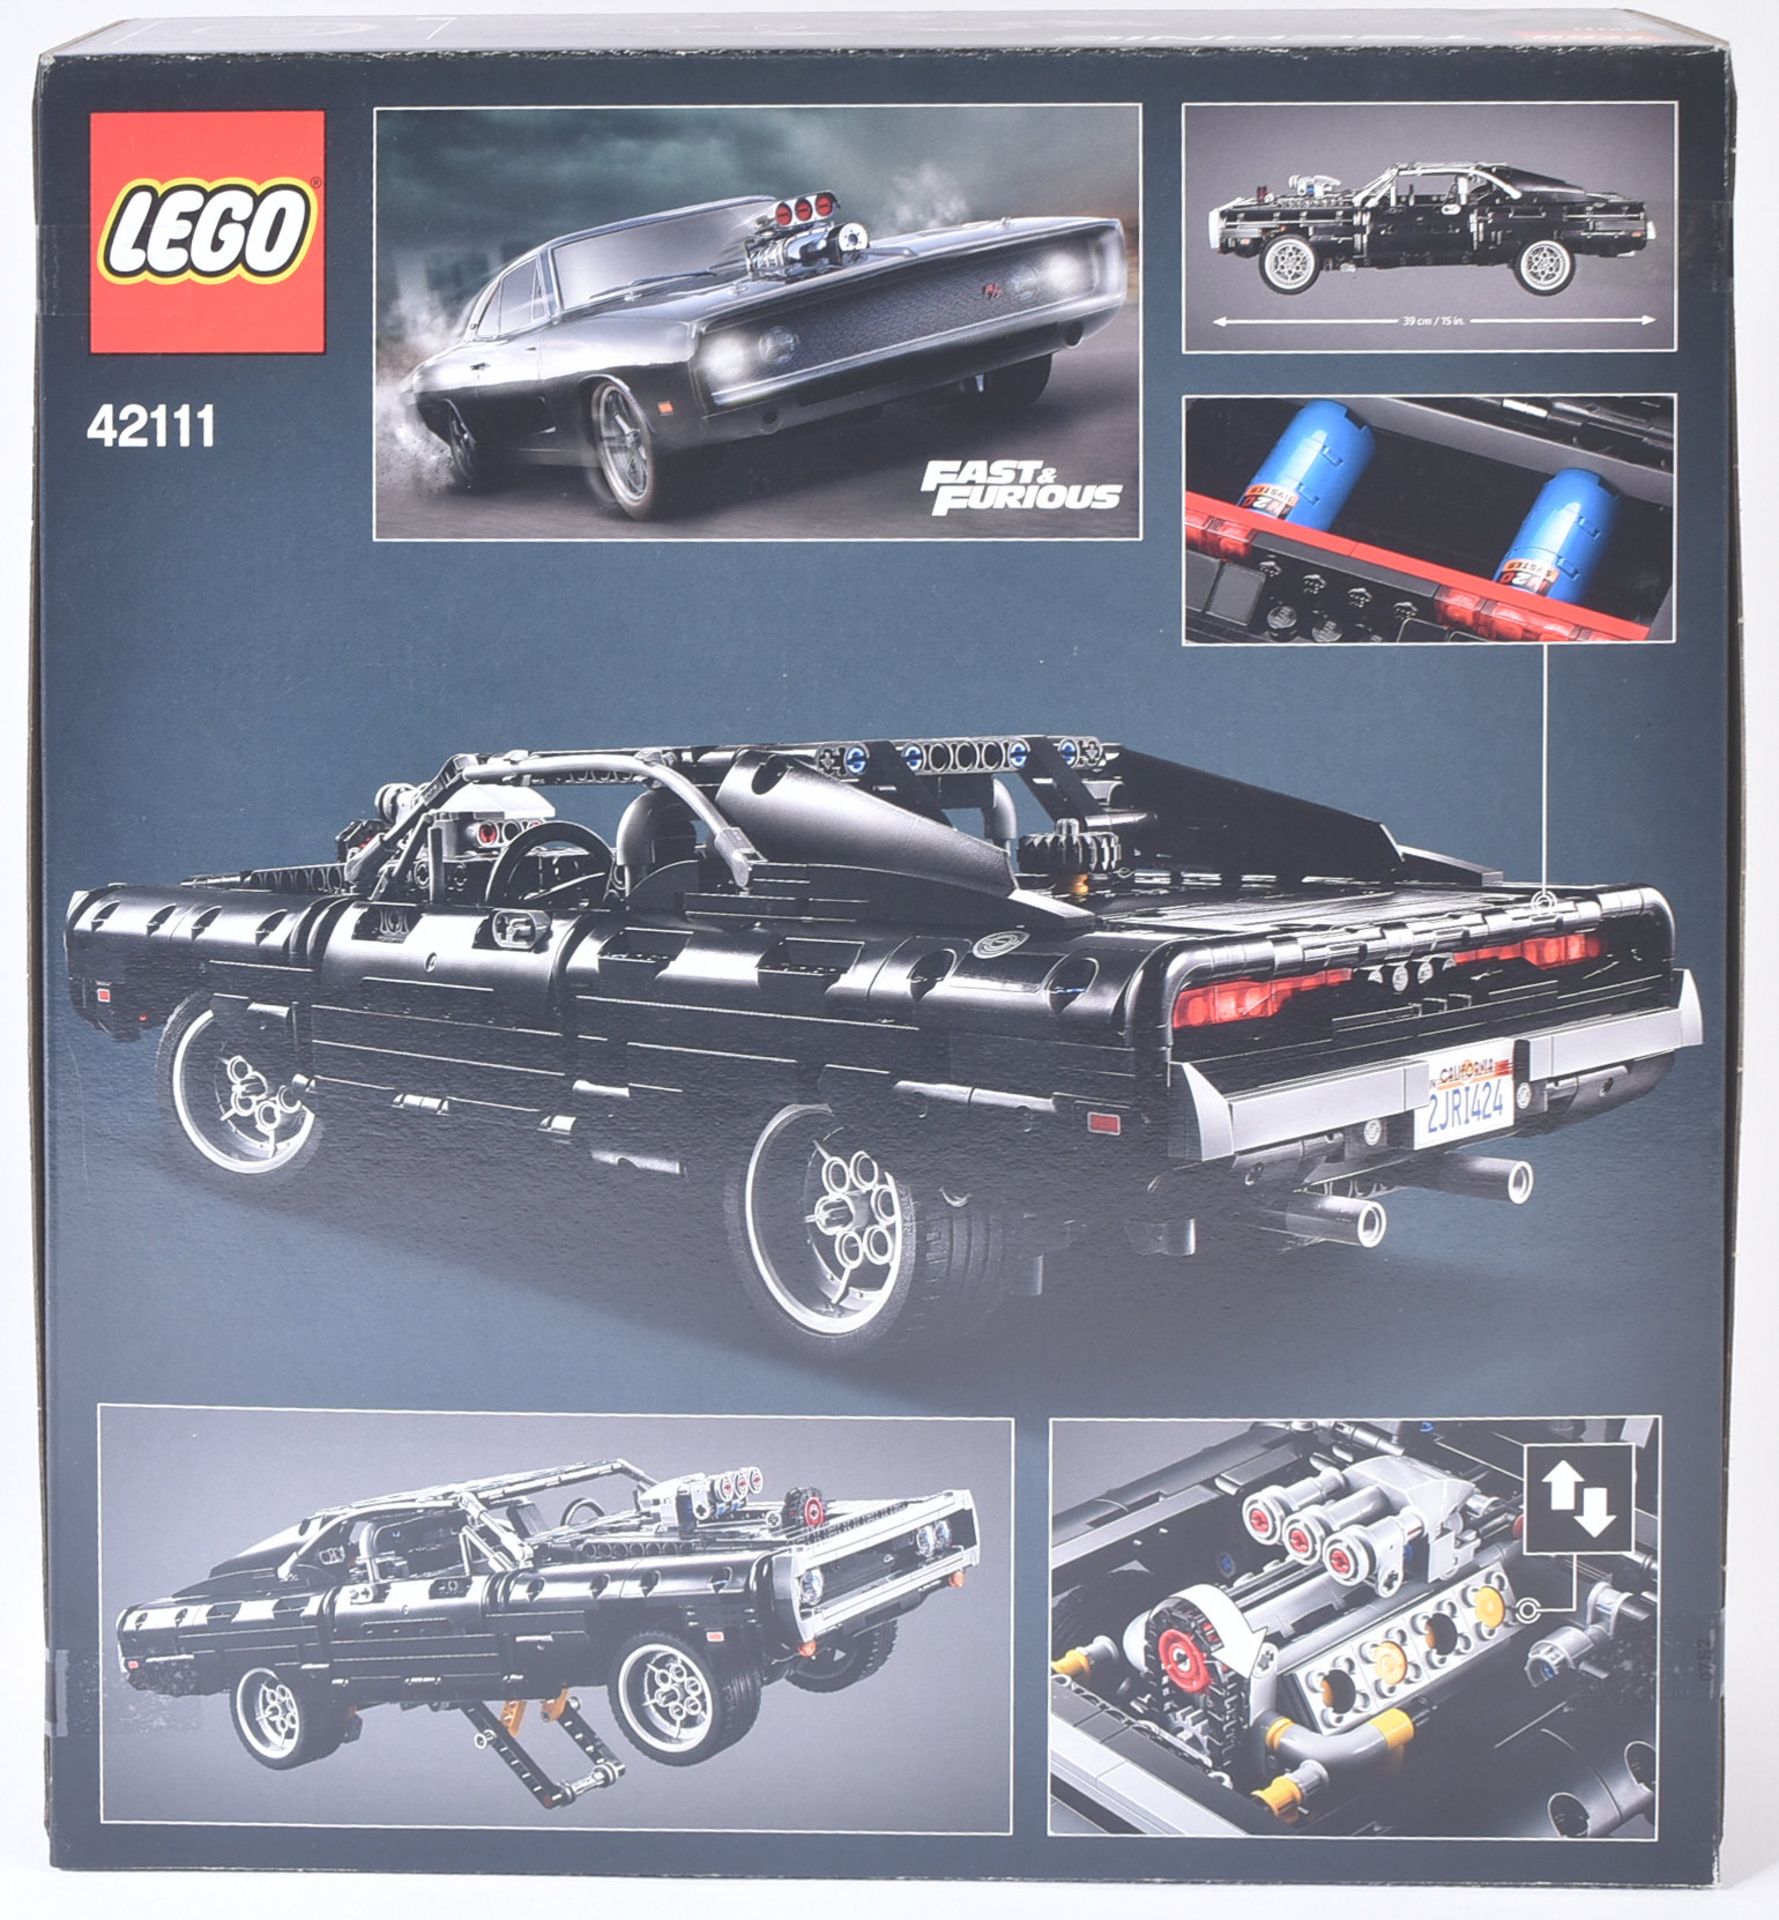 LEGO SET - LEGO TECHNIC - 42111 - FAST & FURIOUS DOM'S DODGE CHARGER - Image 4 of 10